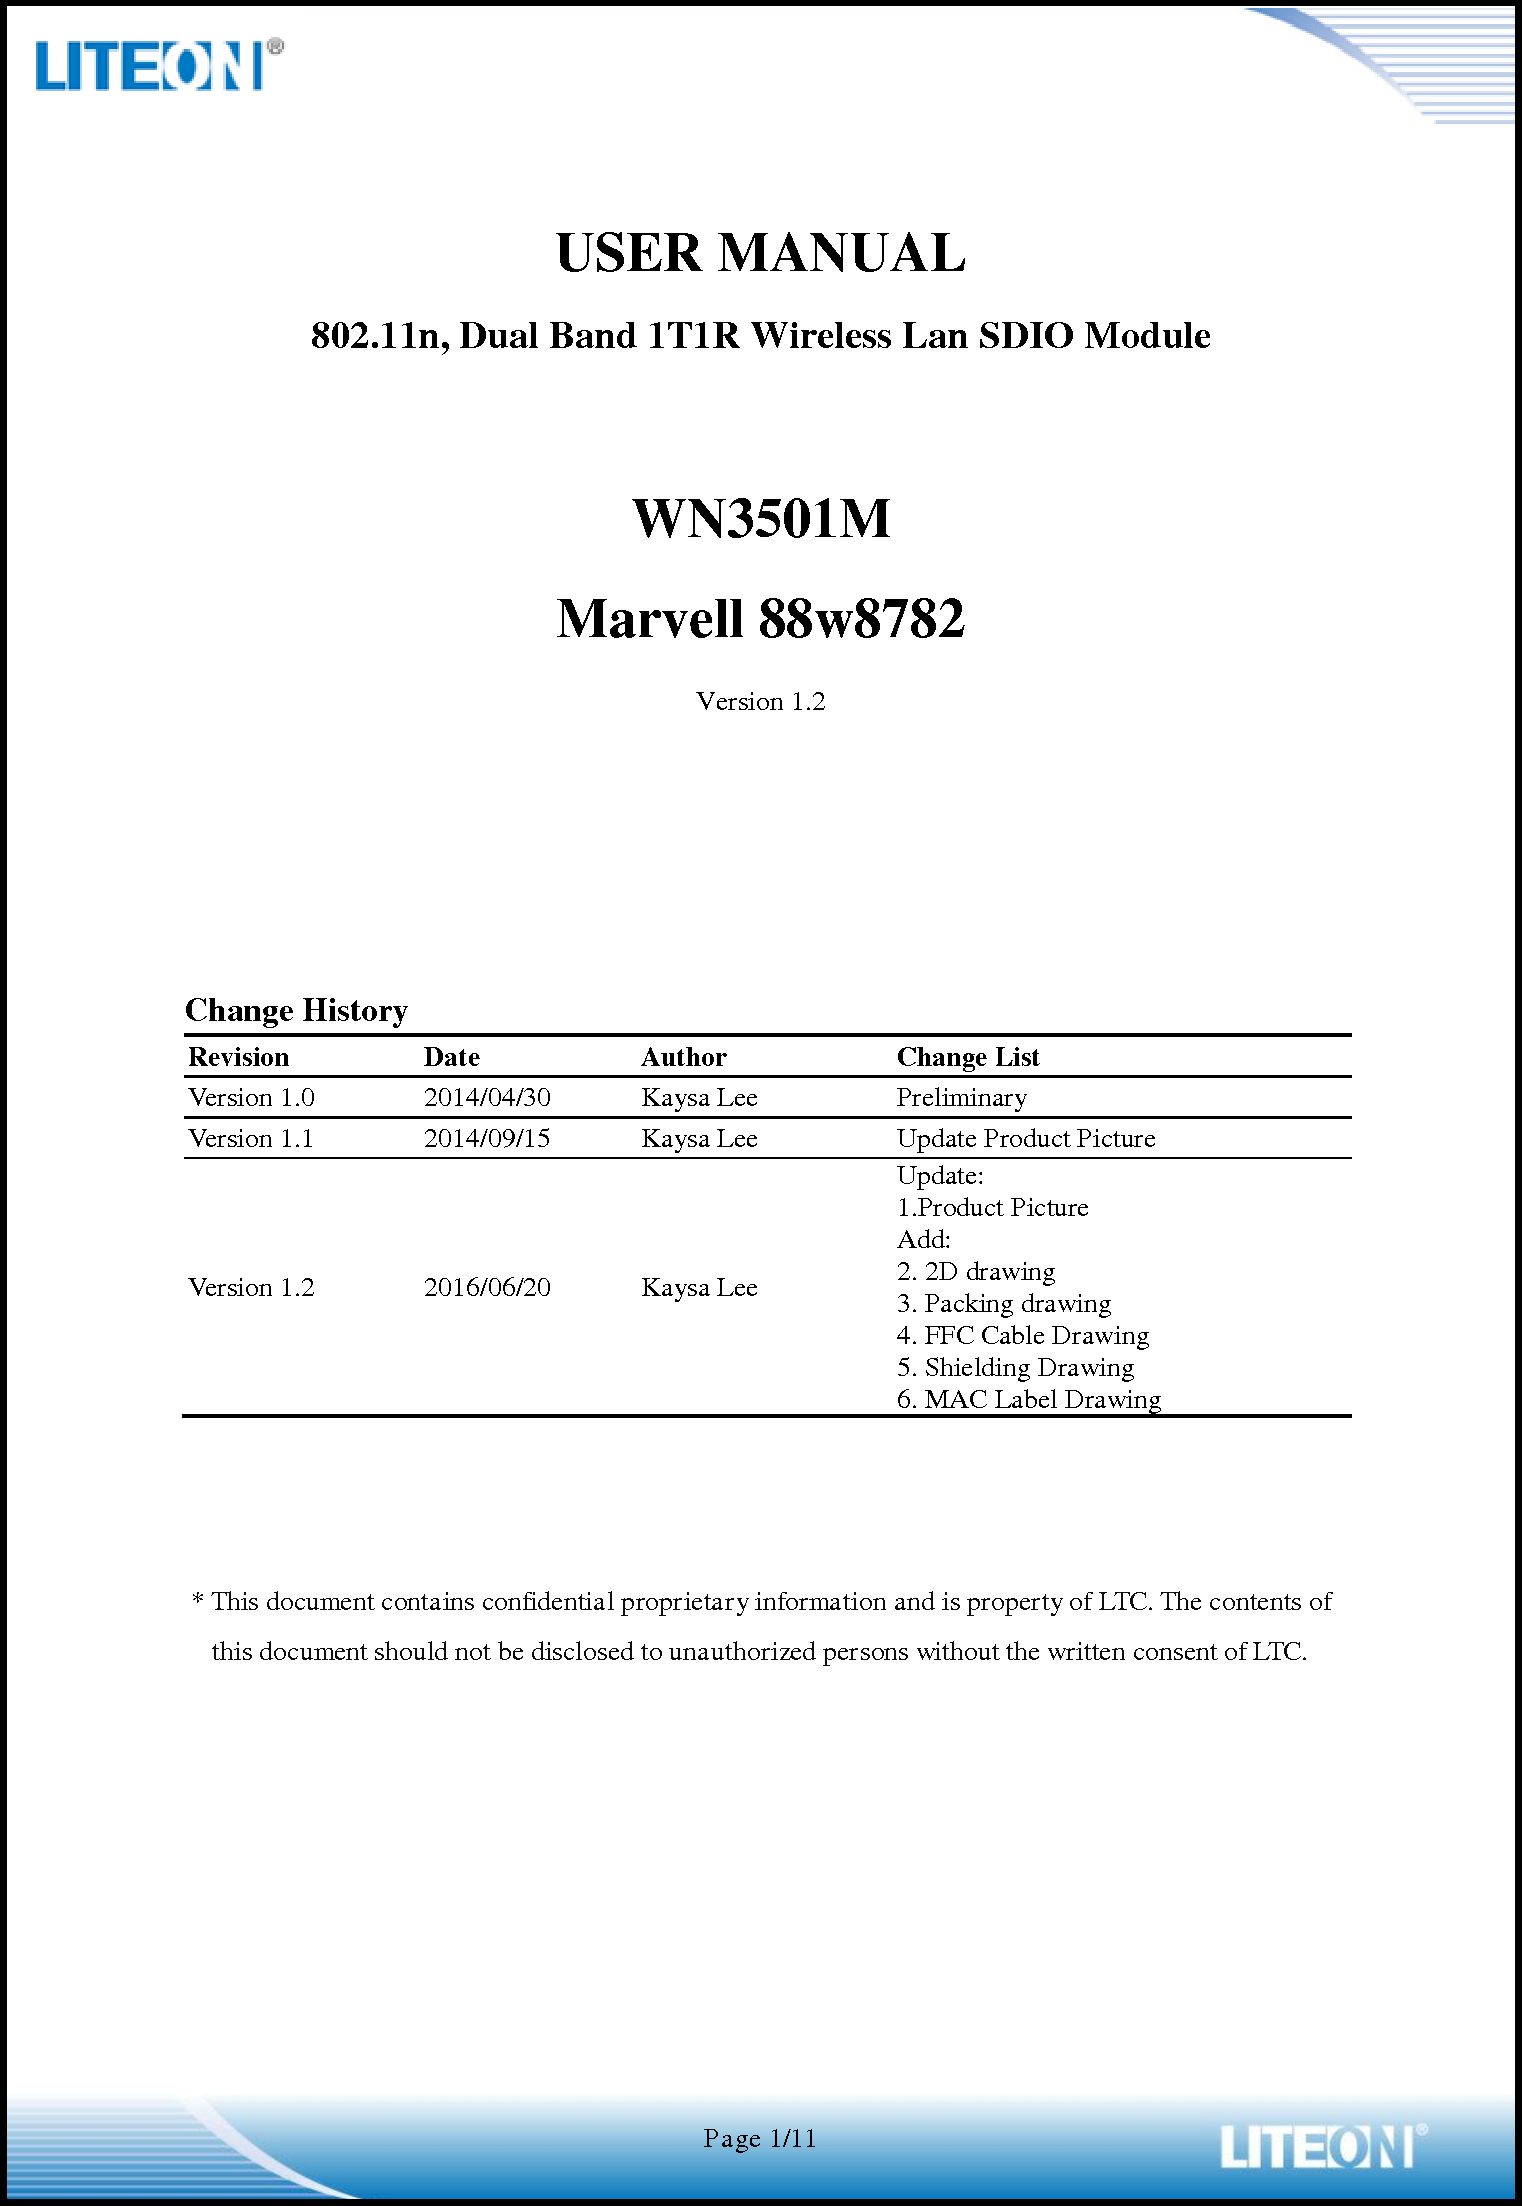  Page 1/11   USER MANUAL 802.11n, Dual Band 1T1R Wireless Lan SDIO Module  WN3501M Marvell 88w8782 Version 1.2      Change History Revision Date Author Change List Version 1.0 2014/04/30 Kaysa Lee Preliminary Version 1.1 2014/09/15 Kaysa Lee Update Product Picture Version 1.2 2016/06/20 Kaysa Lee Update:   1.Product Picture Add: 2. 2D drawing 3. Packing drawing 4. FFC Cable Drawing 5. Shielding Drawing 6. MAC Label Drawing    * This document contains confidential proprietary information and is property of LTC. The contents of this document should not be disclosed to unauthorized persons without the written consent of LTC.      